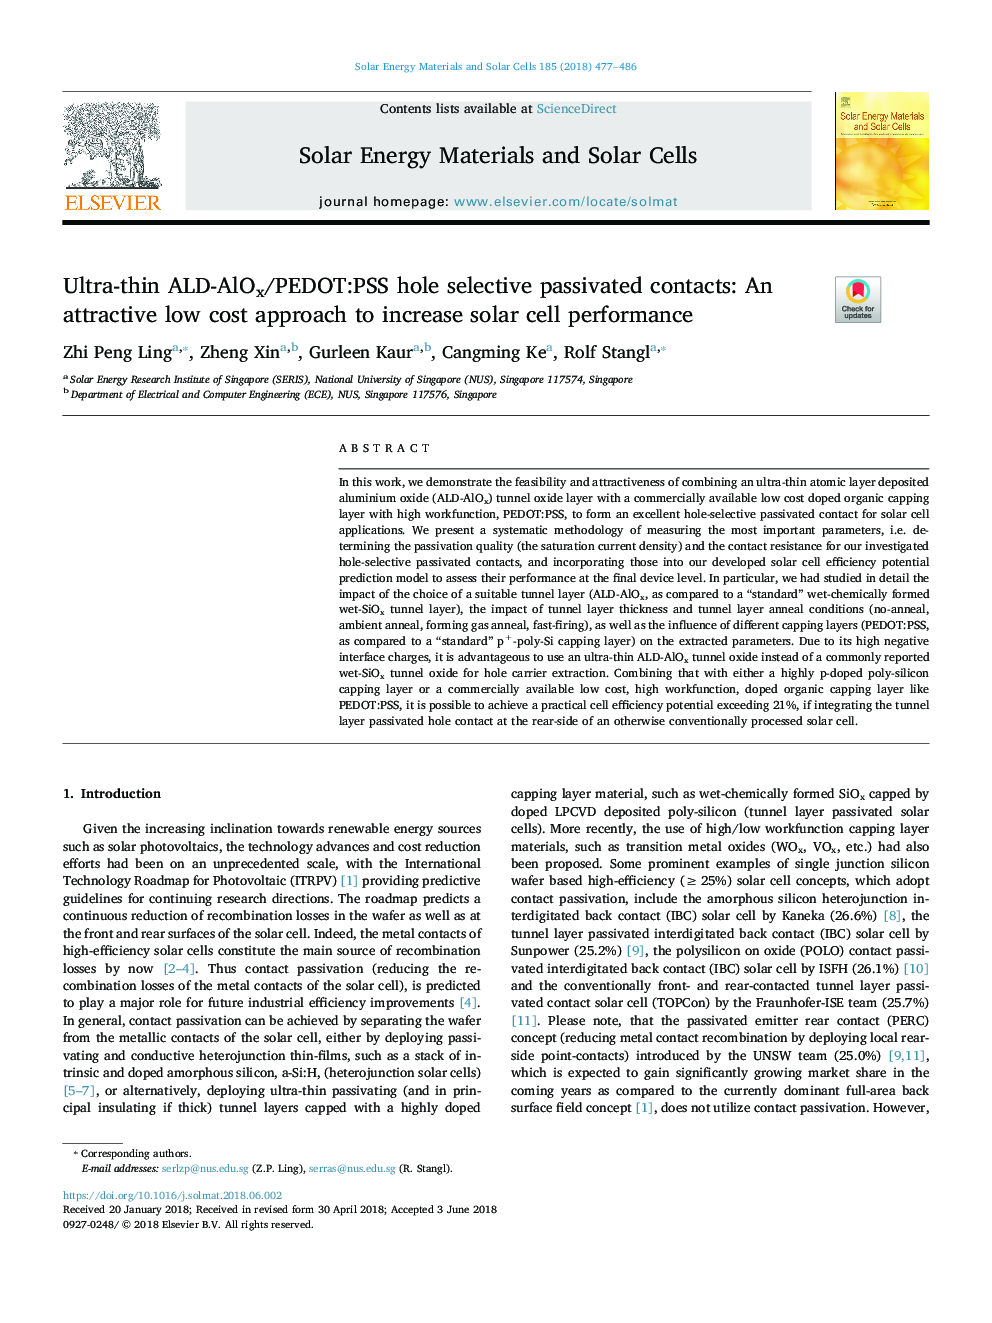 Ultra-thin ALD-AlOx/PEDOT:PSS hole selective passivated contacts: An attractive low cost approach to increase solar cell performance